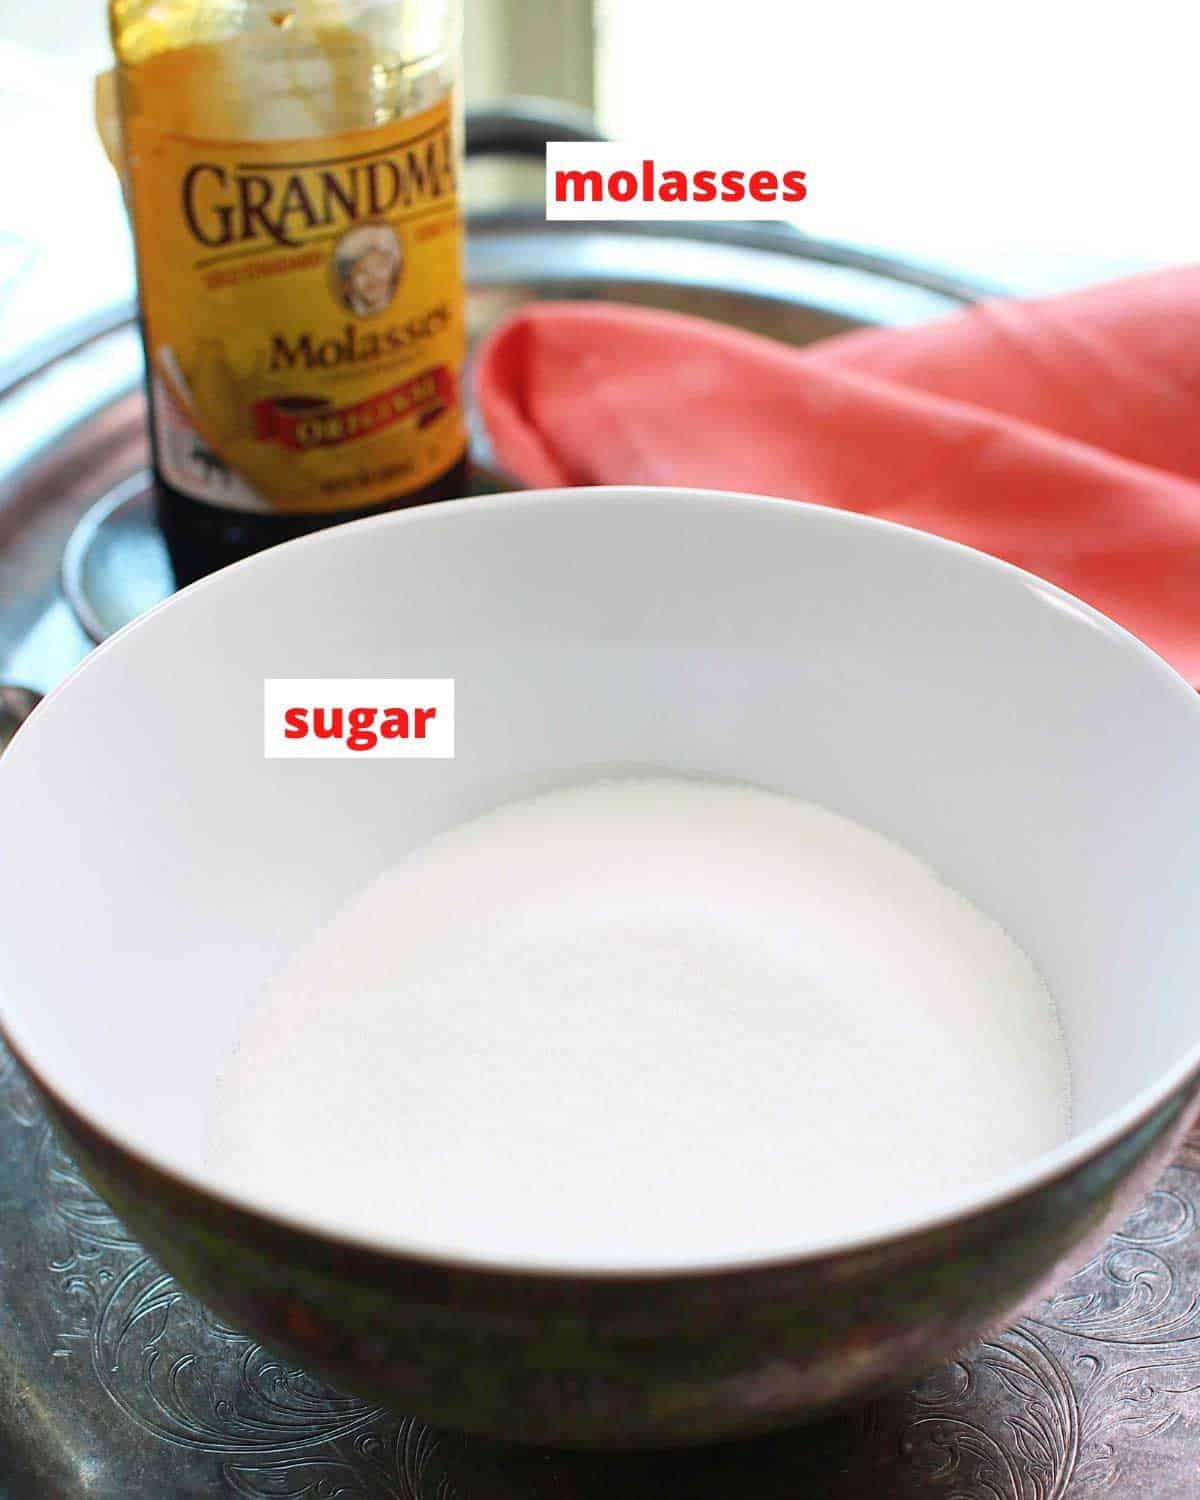 a bowl of sugar and a jar of molasses on a silver tray.